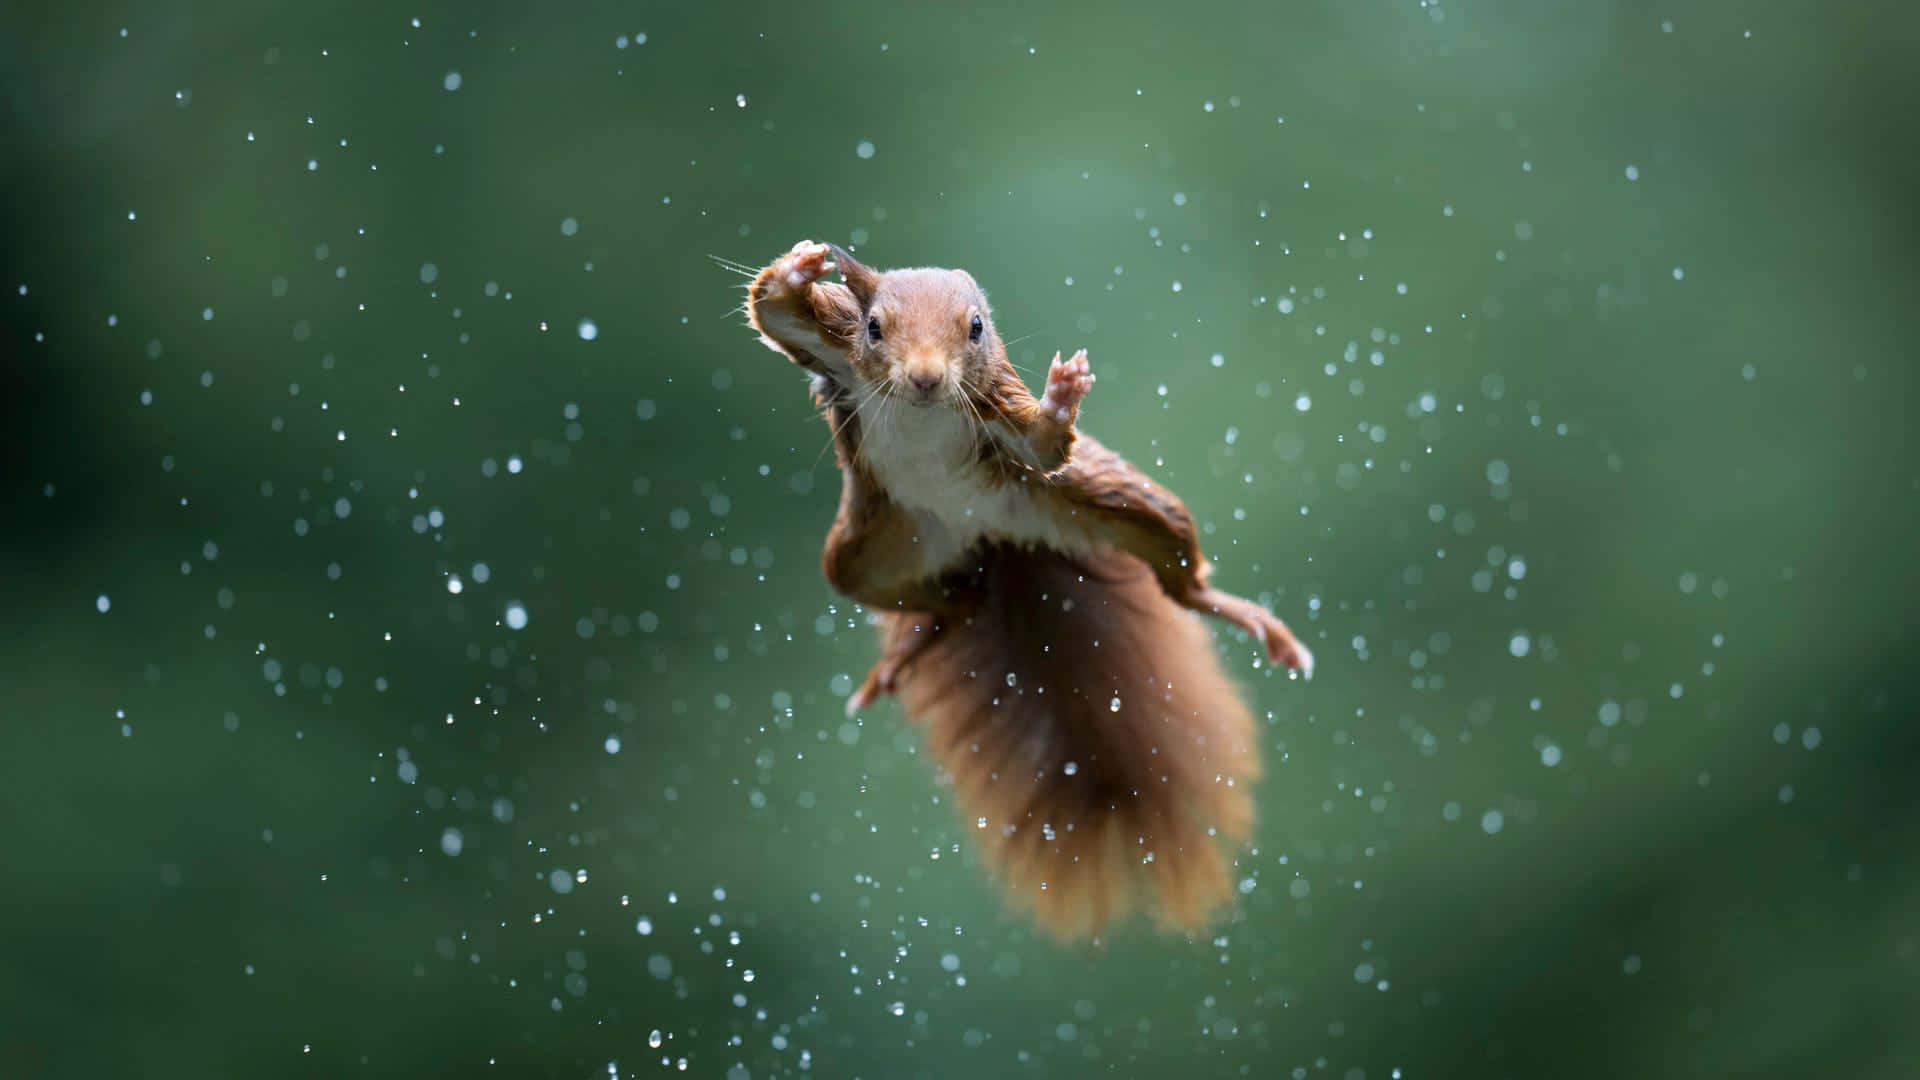 a squirrel jumping in the rain